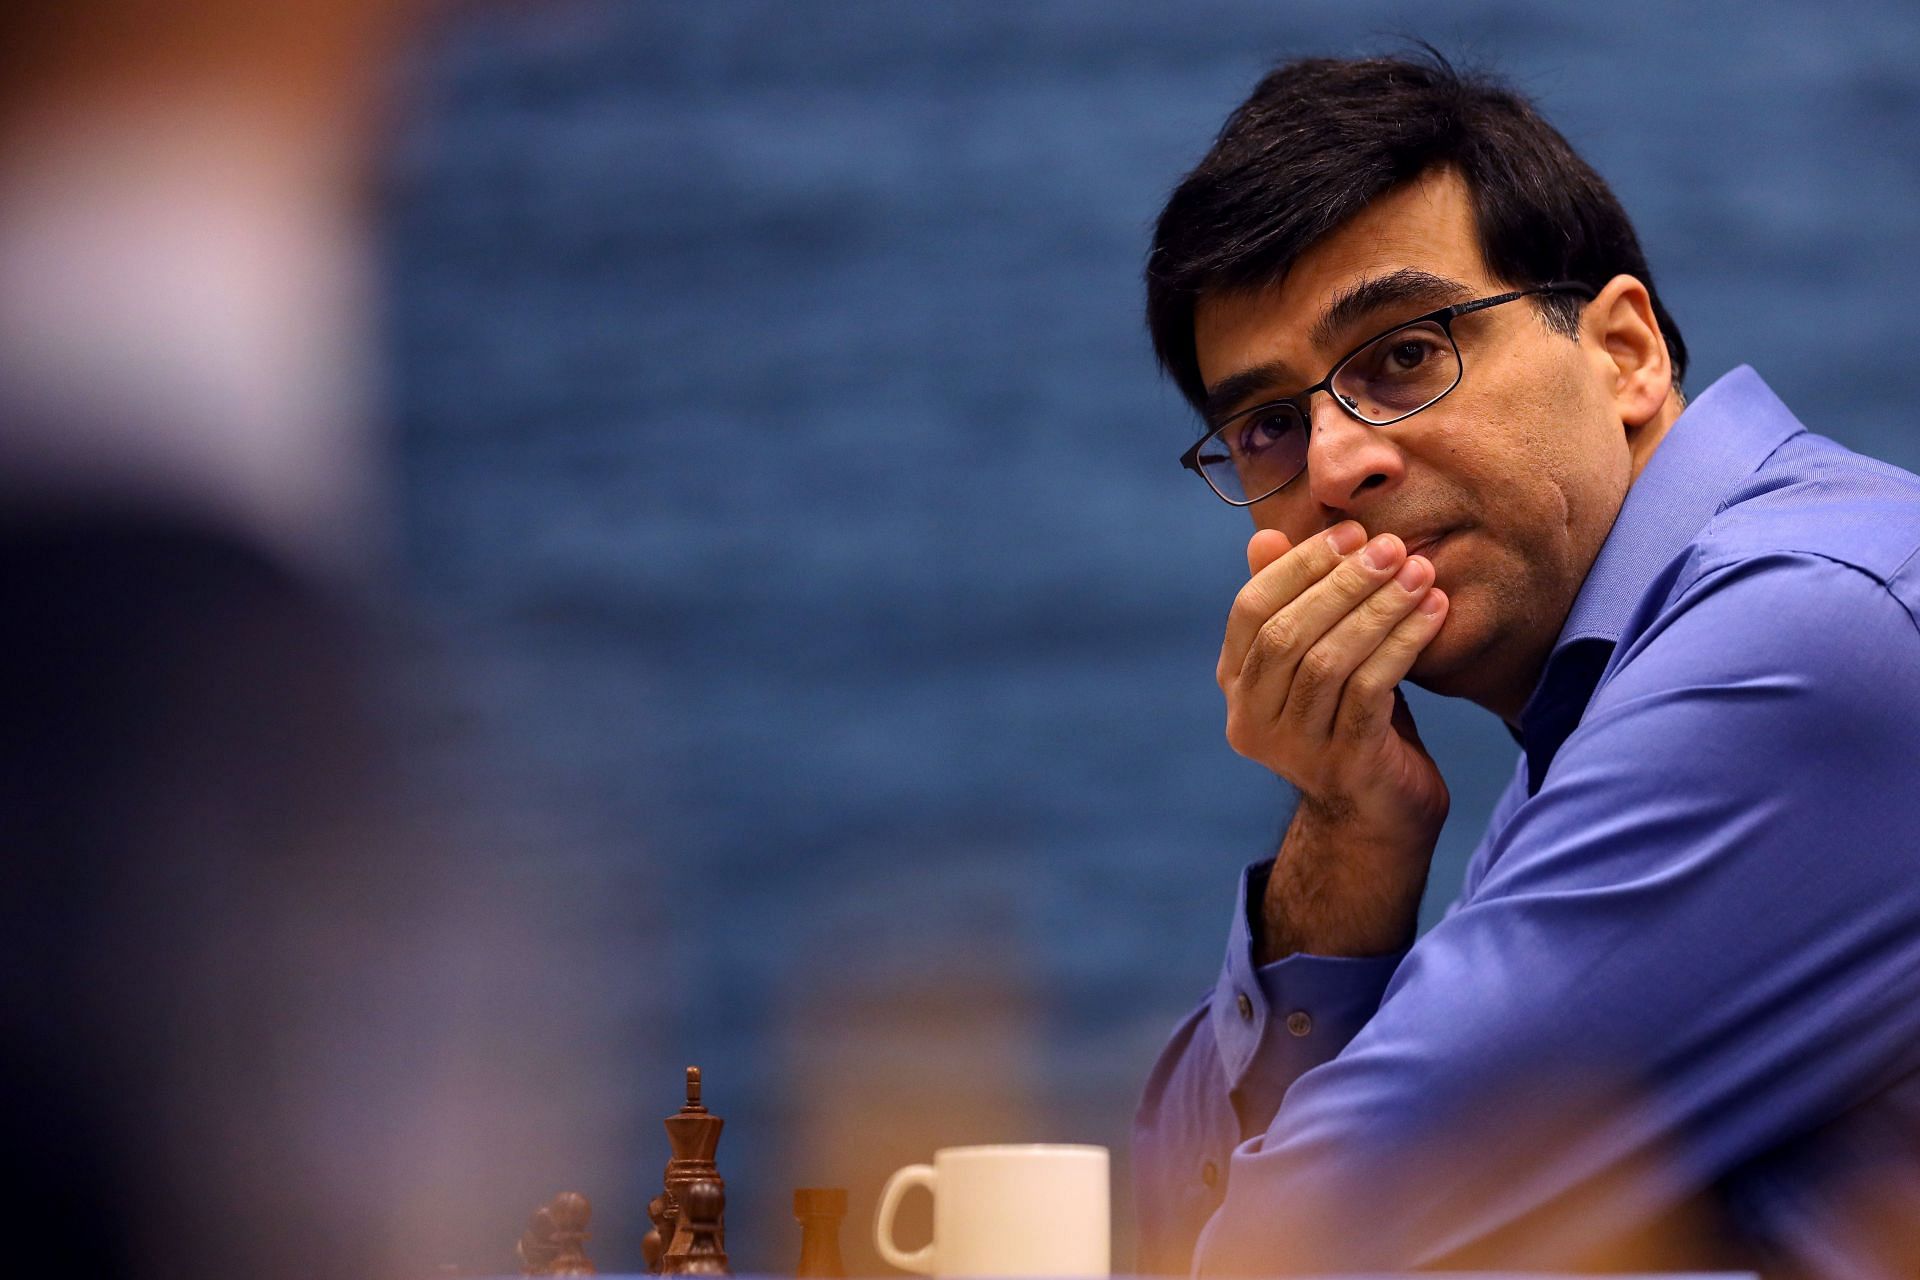 D Gukesh the first Indian to surpass Vishy Anand live FIDE ratings